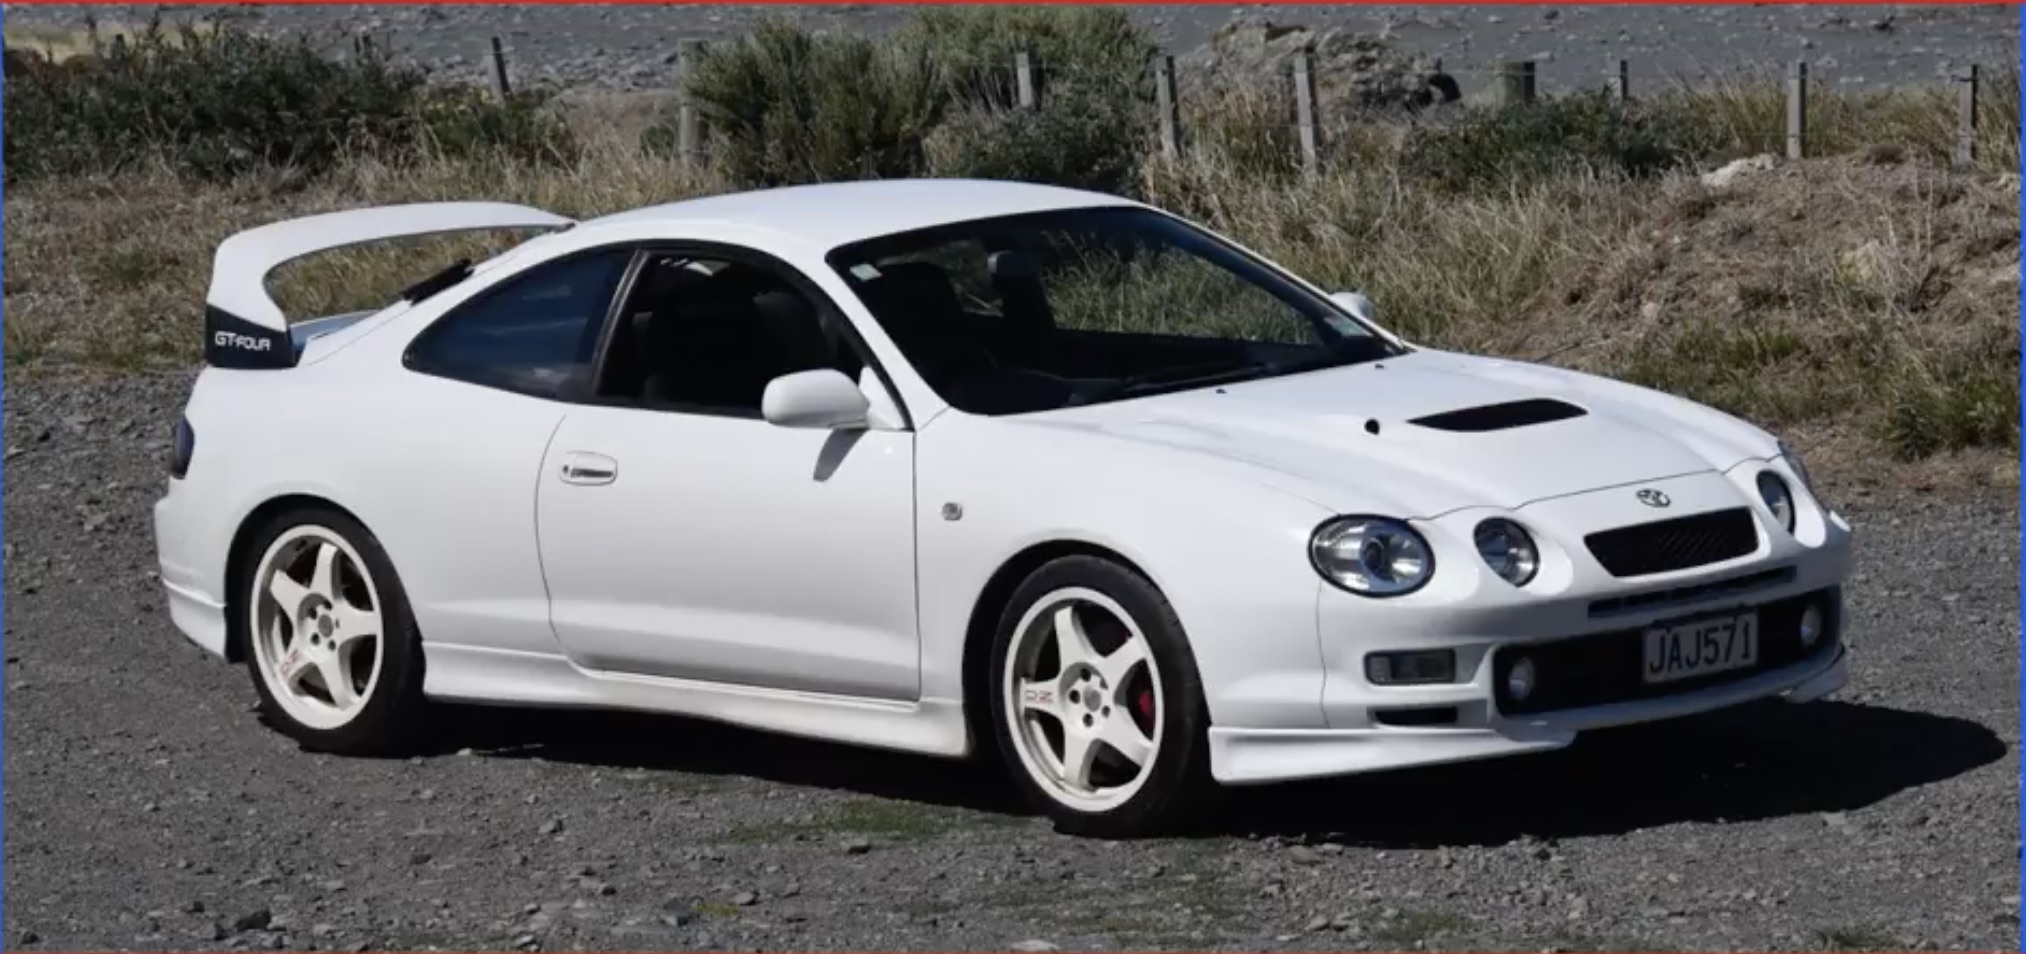 Nearly Legal: The Toyota Celica GT-Four That’s Best Remembered For The Perfect WRC Cheat!